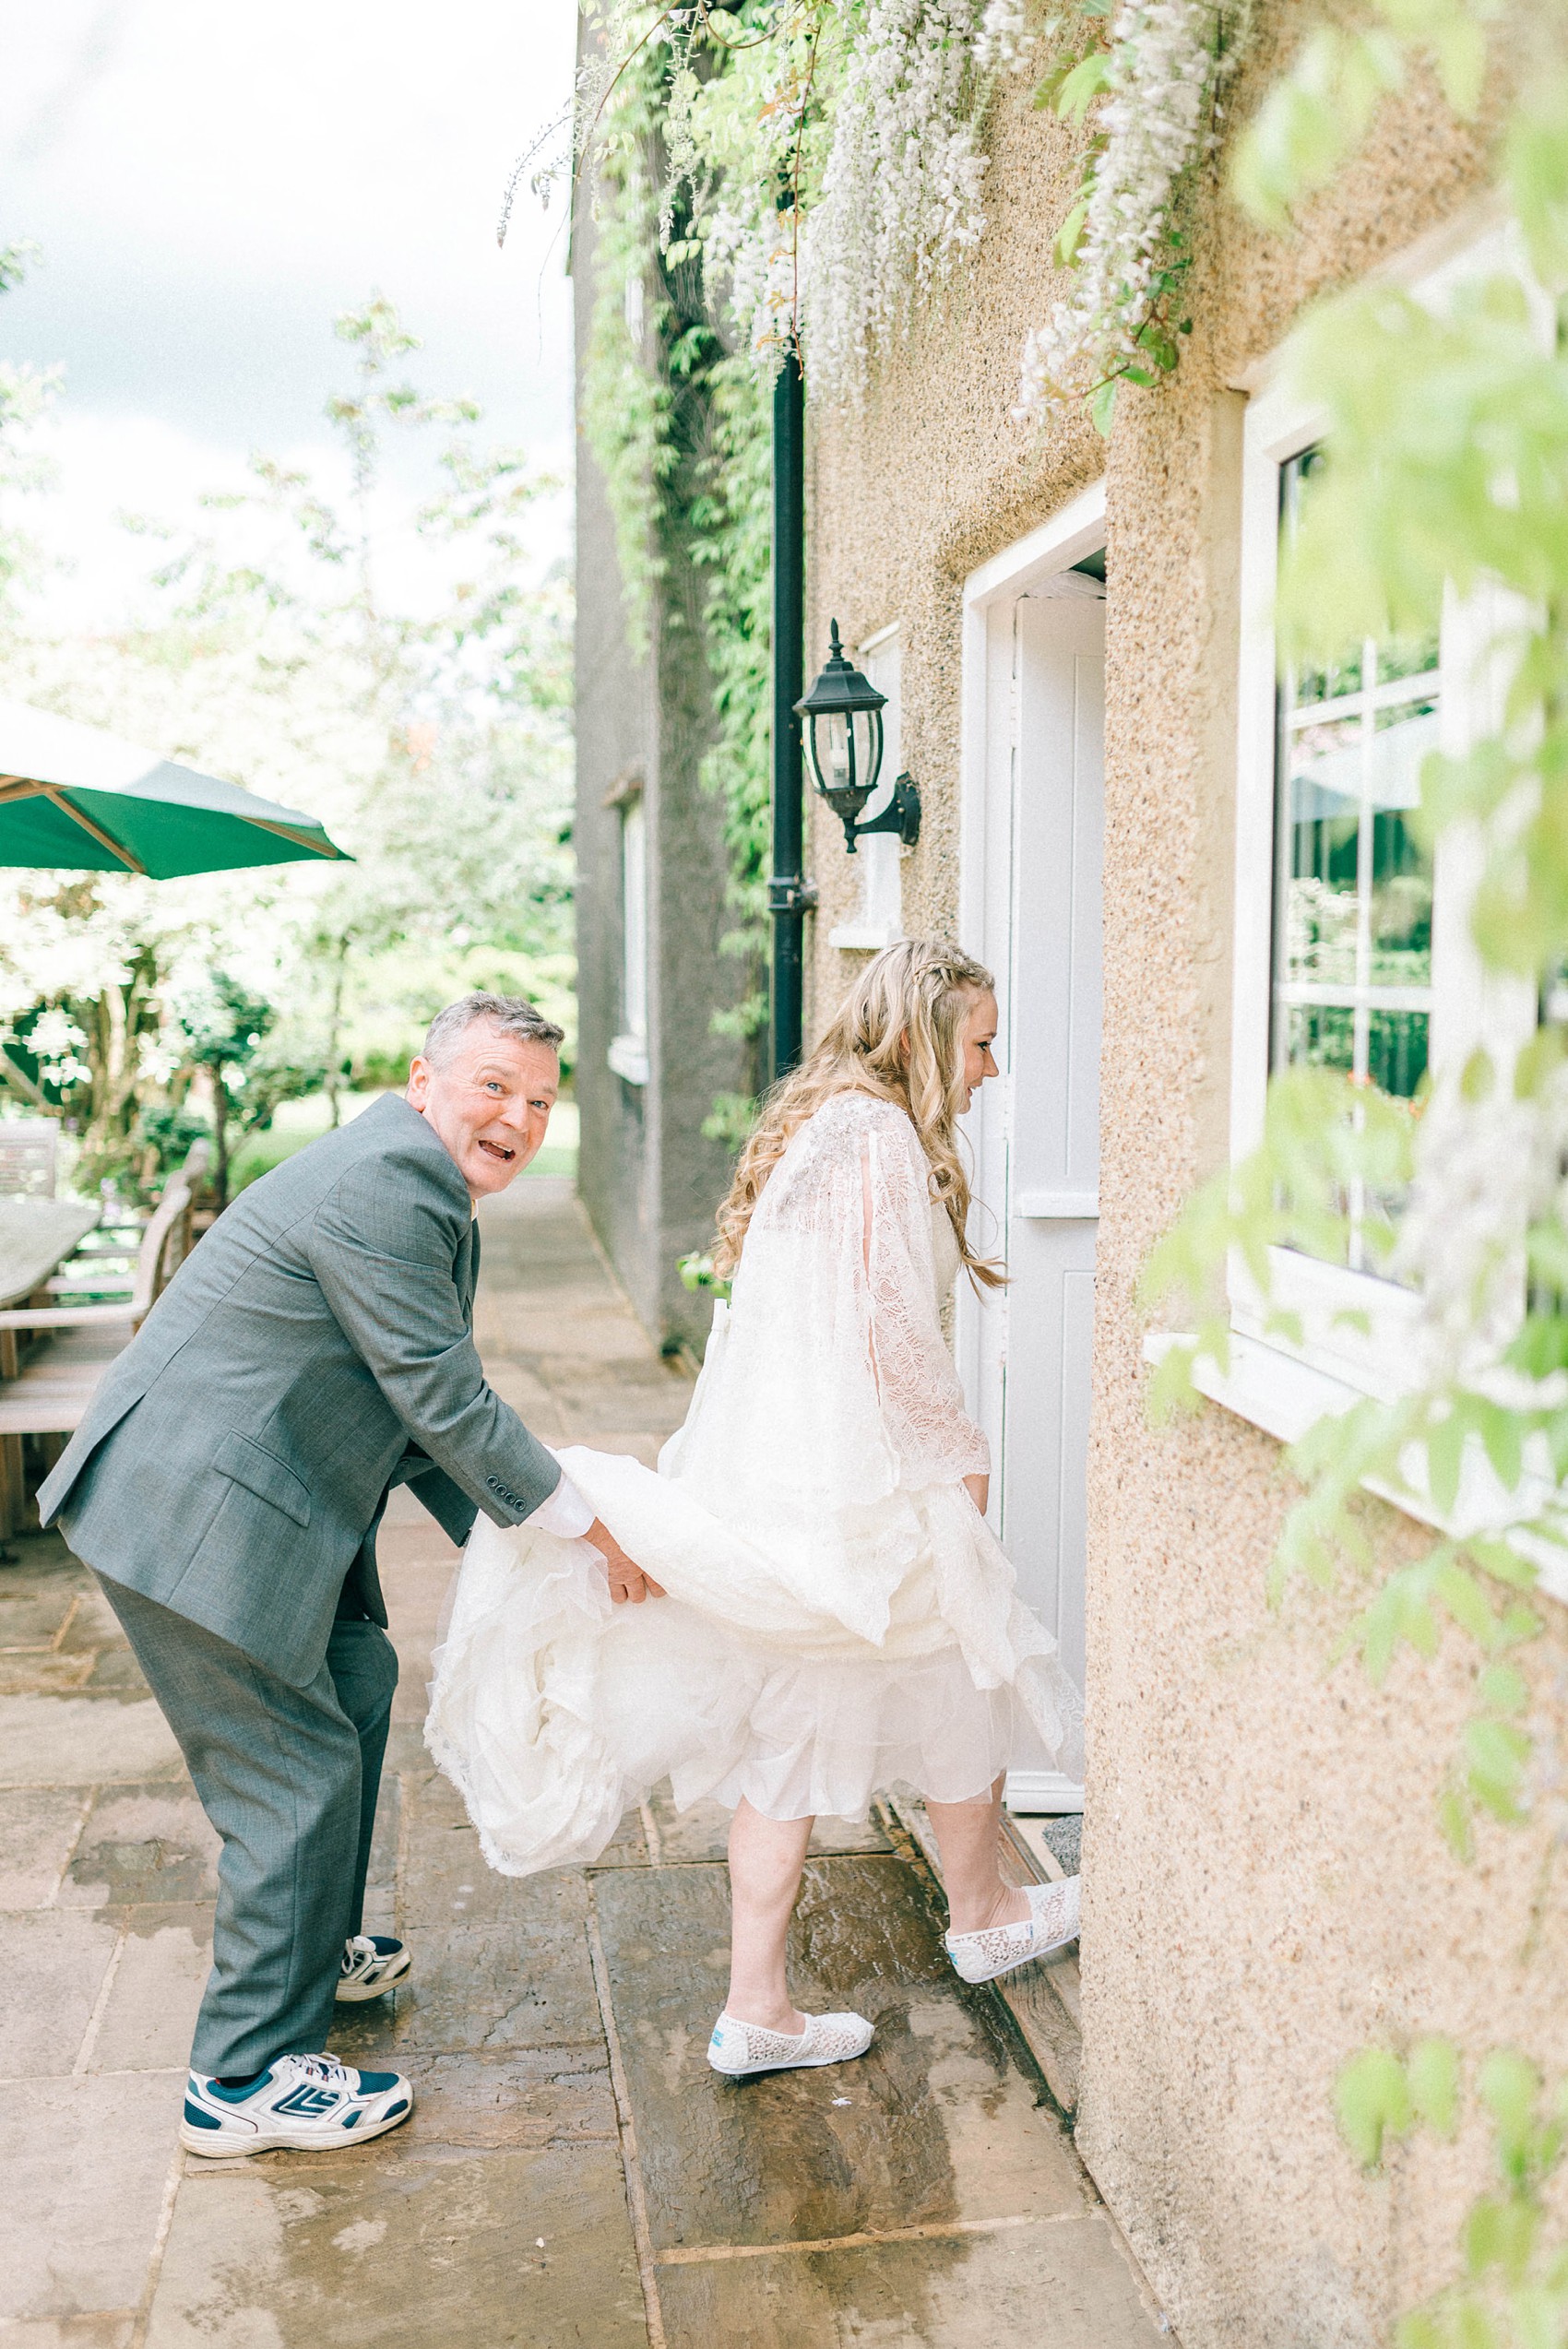 Sunny village Hall wedding North Yorkshire  - A 70's Inspired Bohemian Dress for a Sunny, Spring Village Hall Wedding in North Yorkshire